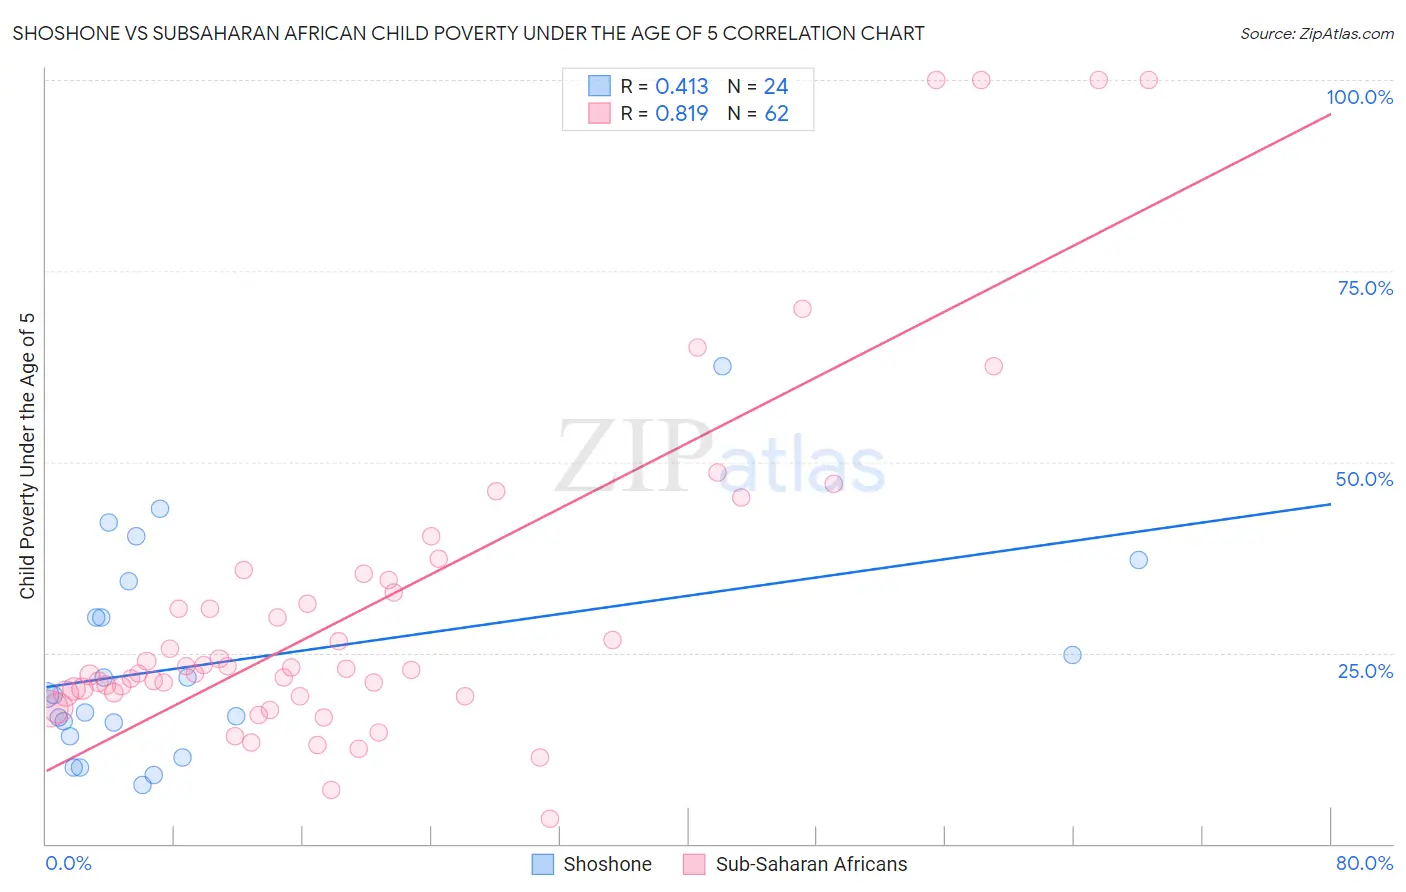 Shoshone vs Subsaharan African Child Poverty Under the Age of 5